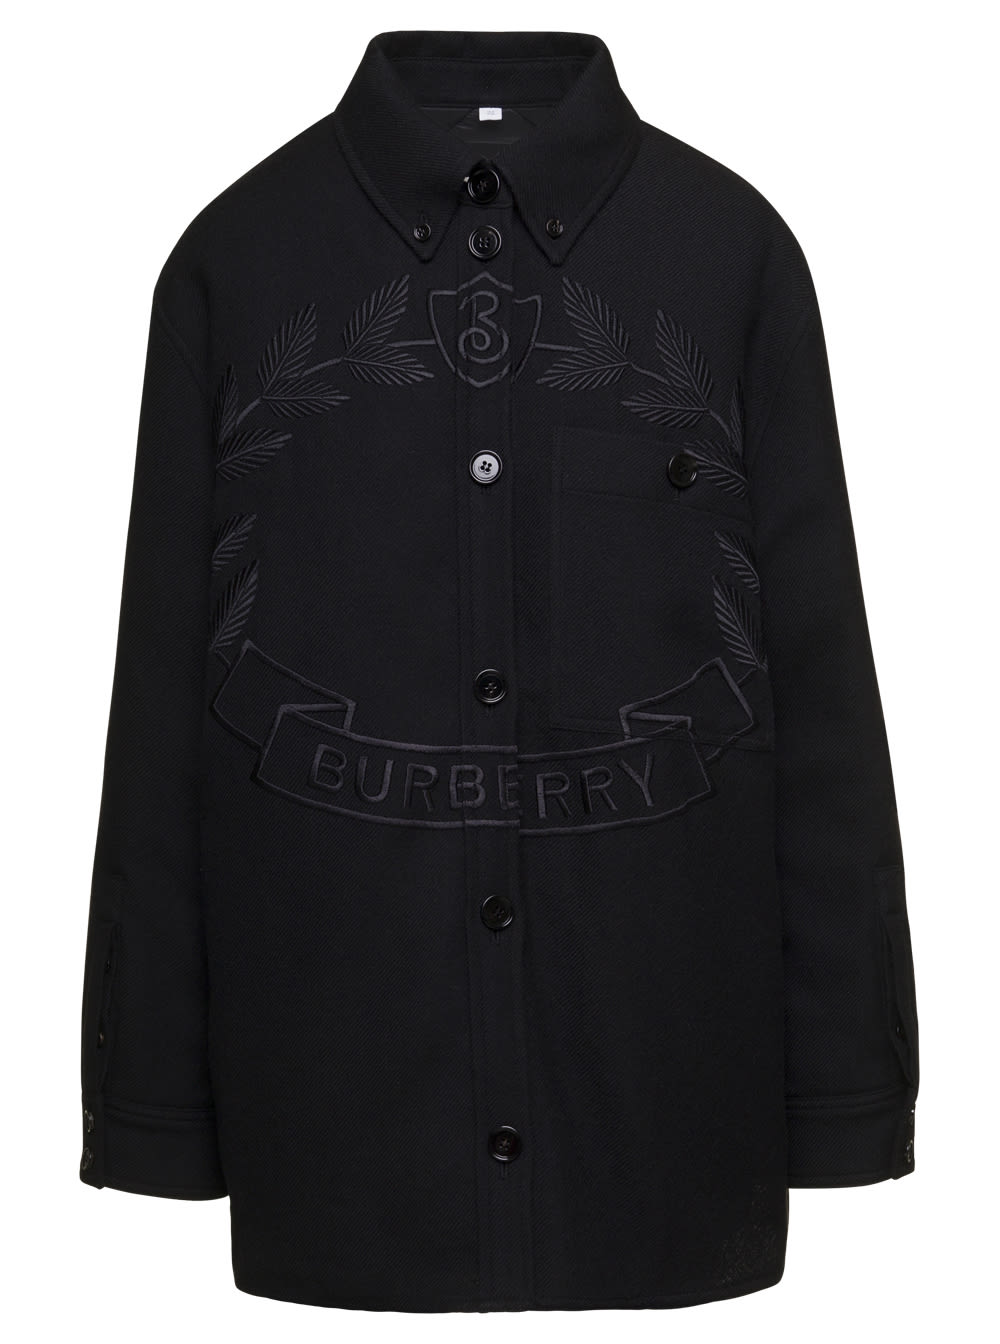 Black Embroidered Oak Leaf Crest Jacket In Wool Twill Woman Burberry